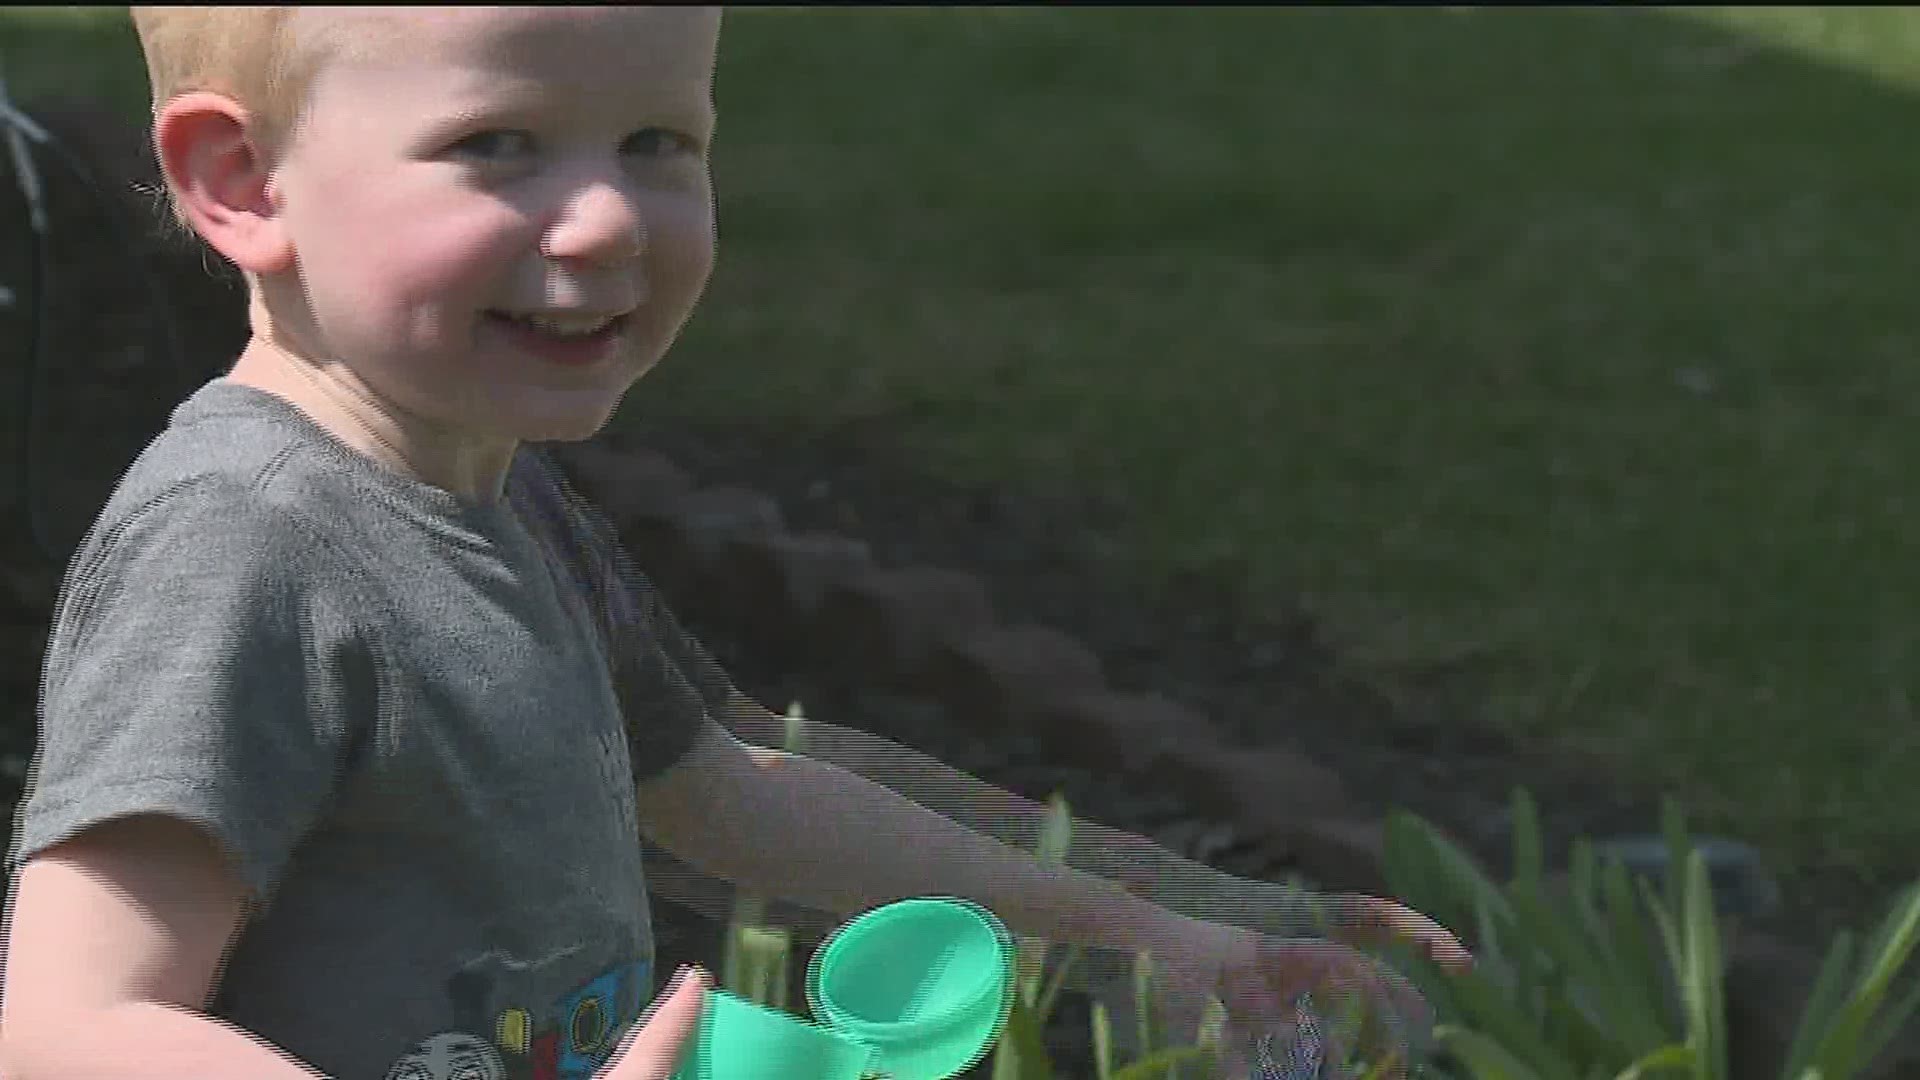 The Easter Bunny's helpers bring egg hunt straight to kids